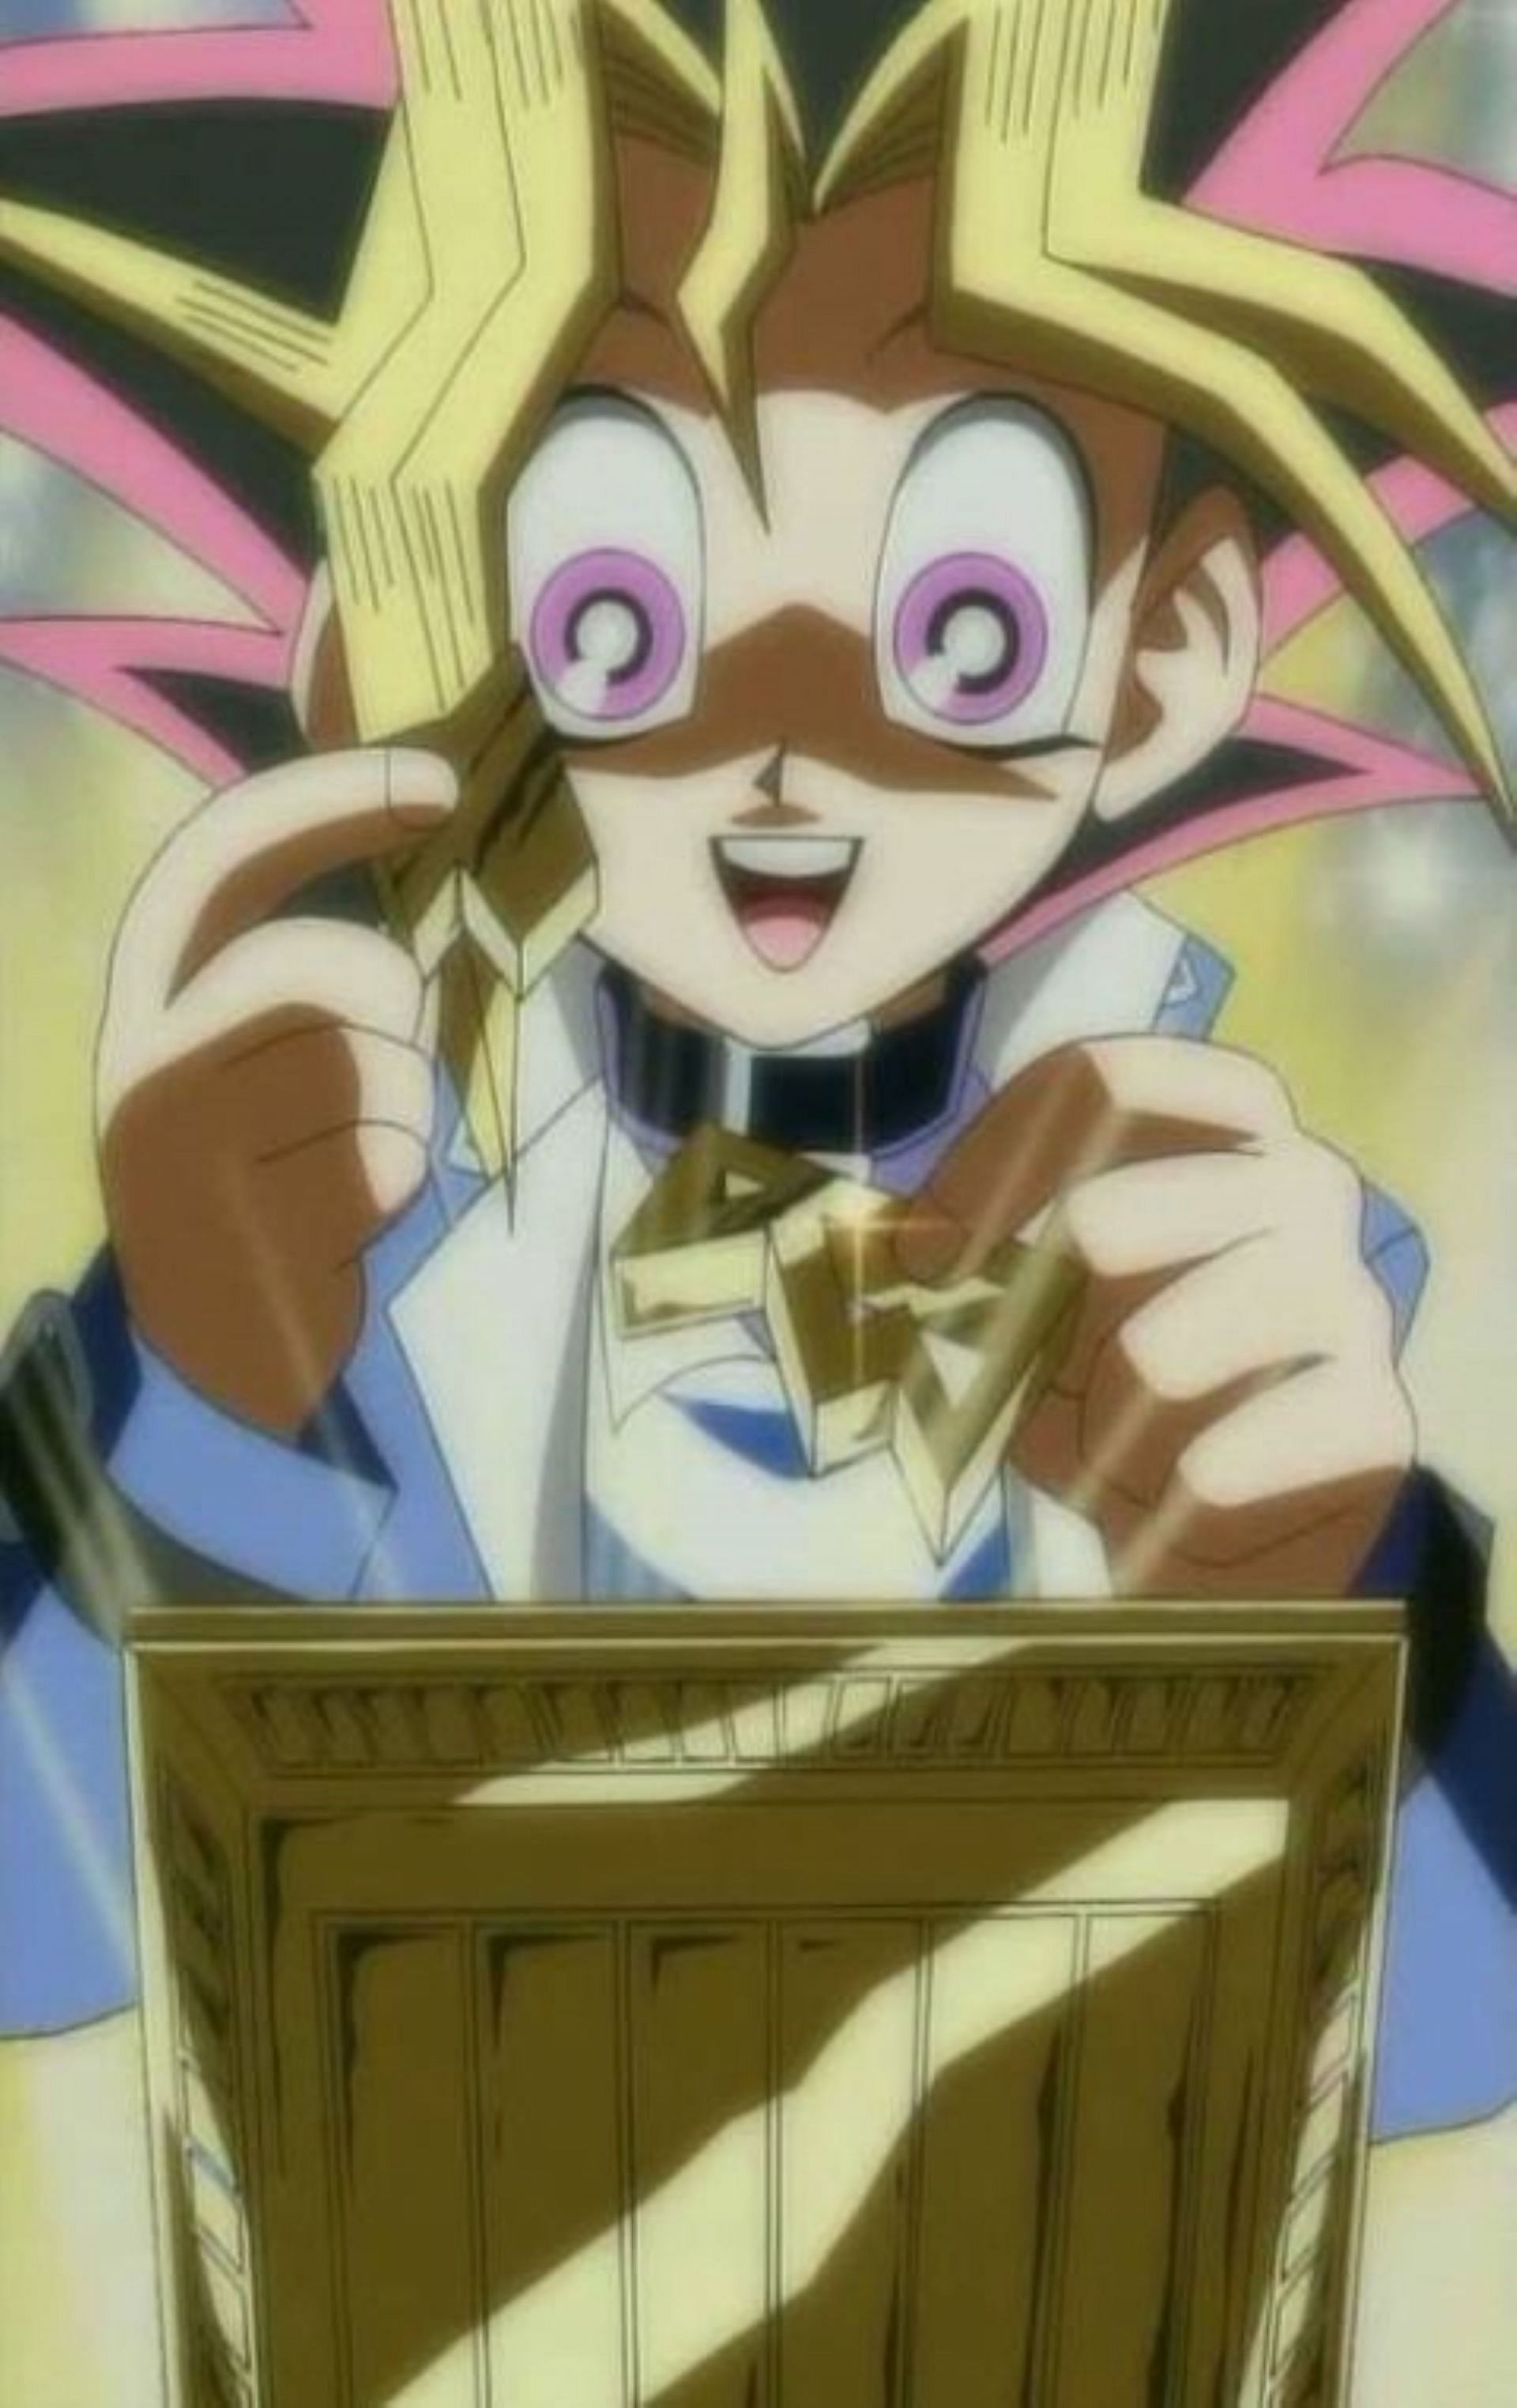 Yugi assembling the Puzzle in the anime (Image via Studio Gallop)